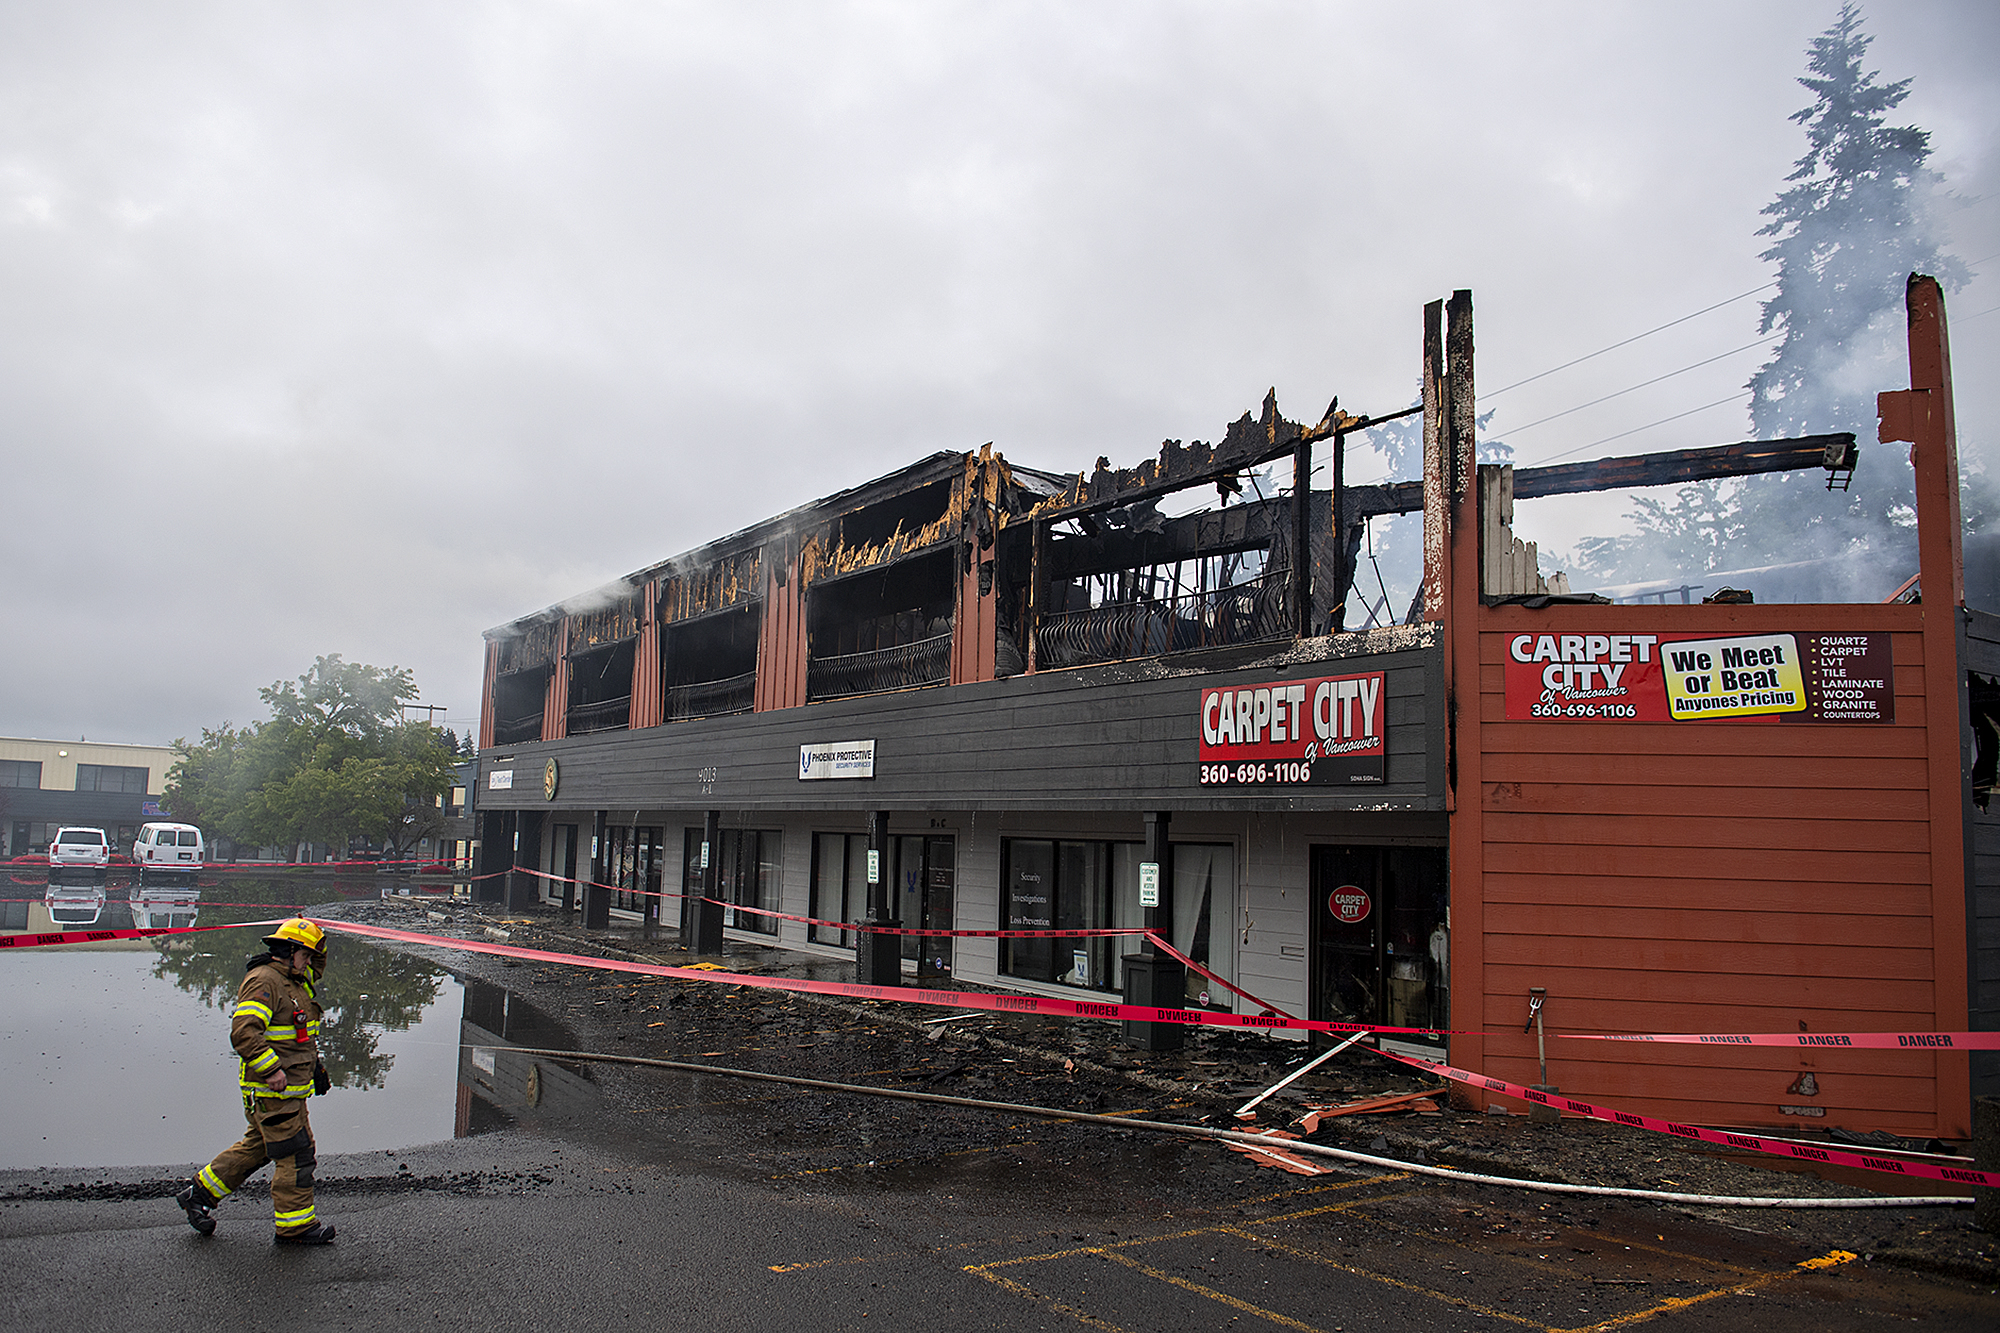 A firefighter works at the scene as a two alarm fire heavily damages a building at the Interstate Business Center in Hazel Dell on Wednesday morning, May 25, 2022.